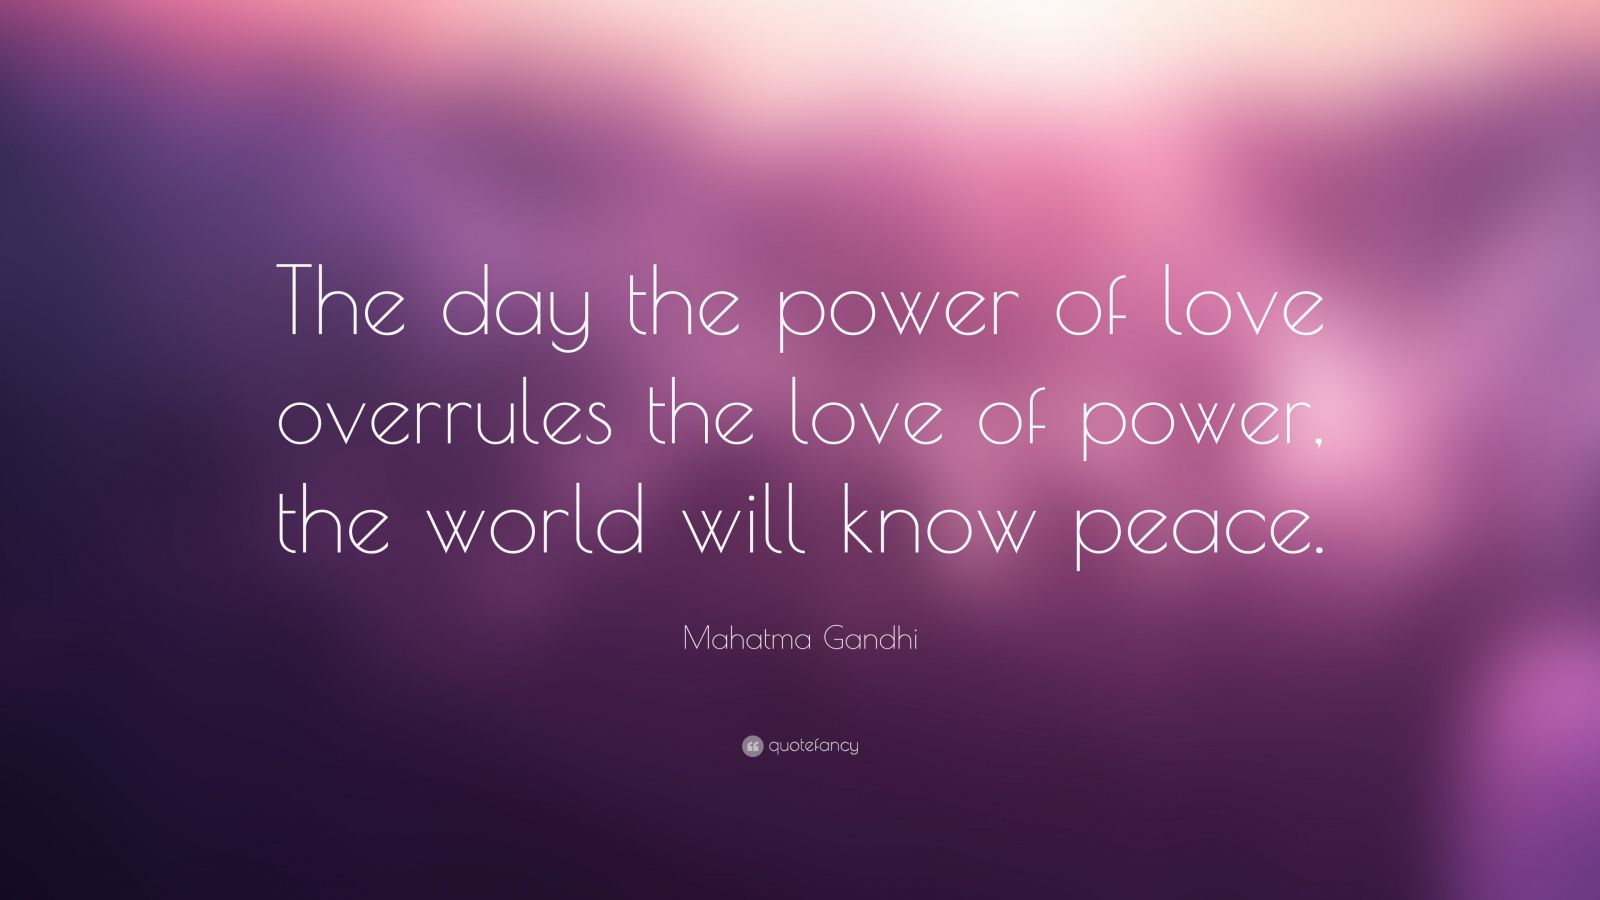 Mahatma Gandhi Quote The Day The Power Of Love Overrules The Love Of Power, The World Will -5440